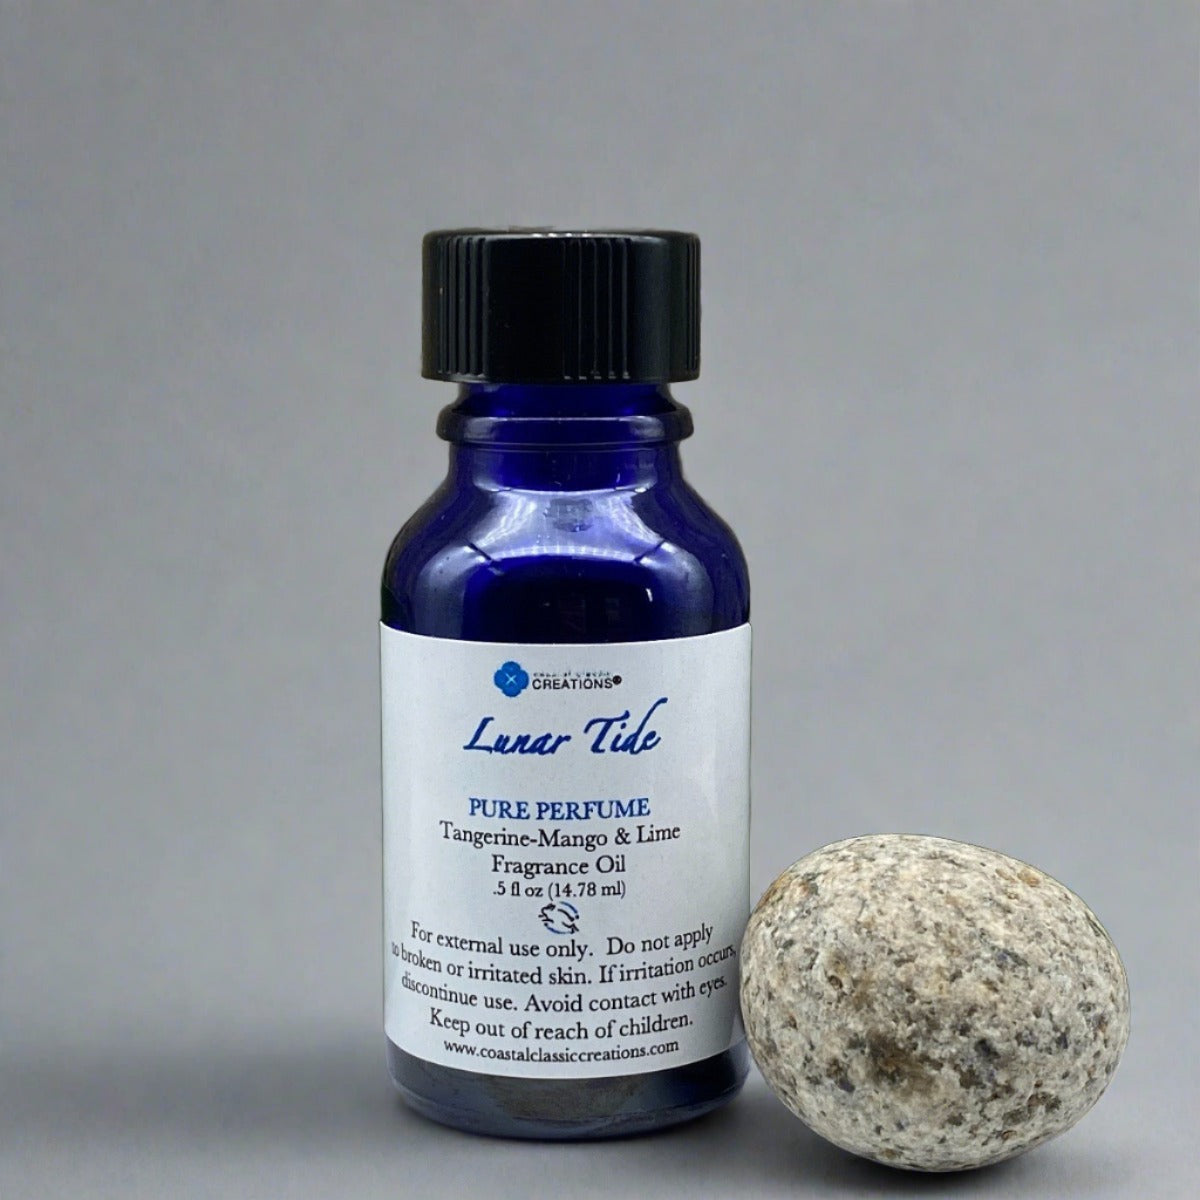 Lunar Tide Perfume for a vibrant and tropical scent